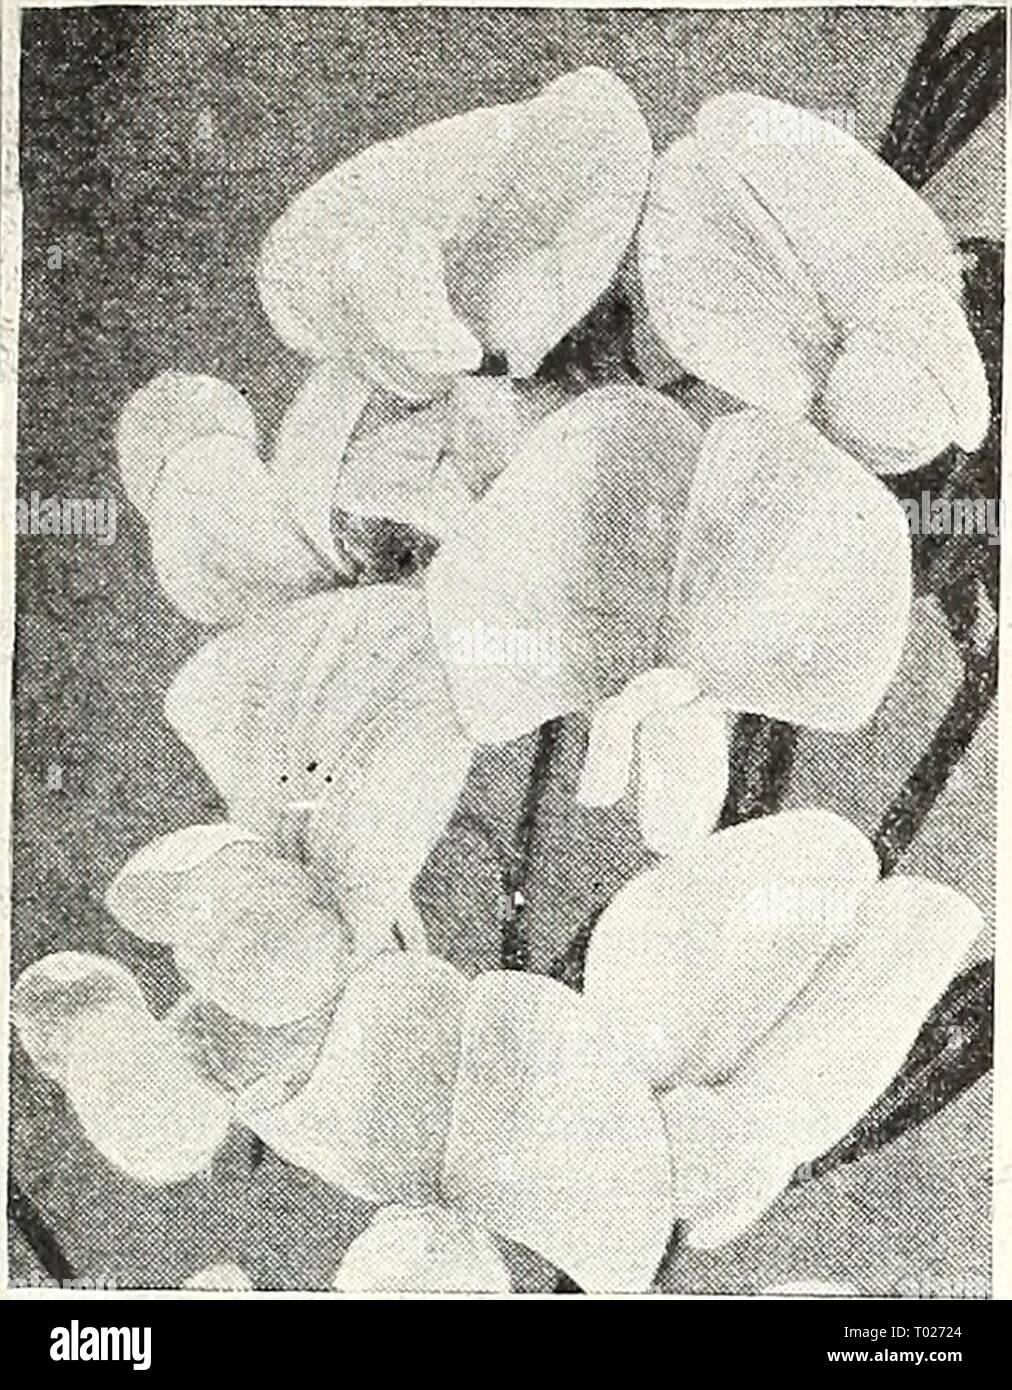 Dreer's garden book for 1947 . dreersgardenbook1947henr Year: 1947  Lathyrus latifolms Lathyrus [^p] ® § Hardy Sweet Pea A showj, tree - flowering, hardy climber tor covering old stumps*fences, etc. Blooms contmuoublv fiom mid- summer until trost. 5-0 feet. 2751 Latifolius, Pink Beauty. Fine rose-pink flower clusters. 2753 — Red (Splendens). Always ad- mired for its rich color. 2755 — White Pearl. Beautiful large, pure white flowers in large trusses. 2756 Mixed Colors. This includes all colors available. Any of the above: Pkt. ISc; large pkt. 60c. Lavatera ® Annual Malloiv 2763 Sunset. An easi Stock Photo